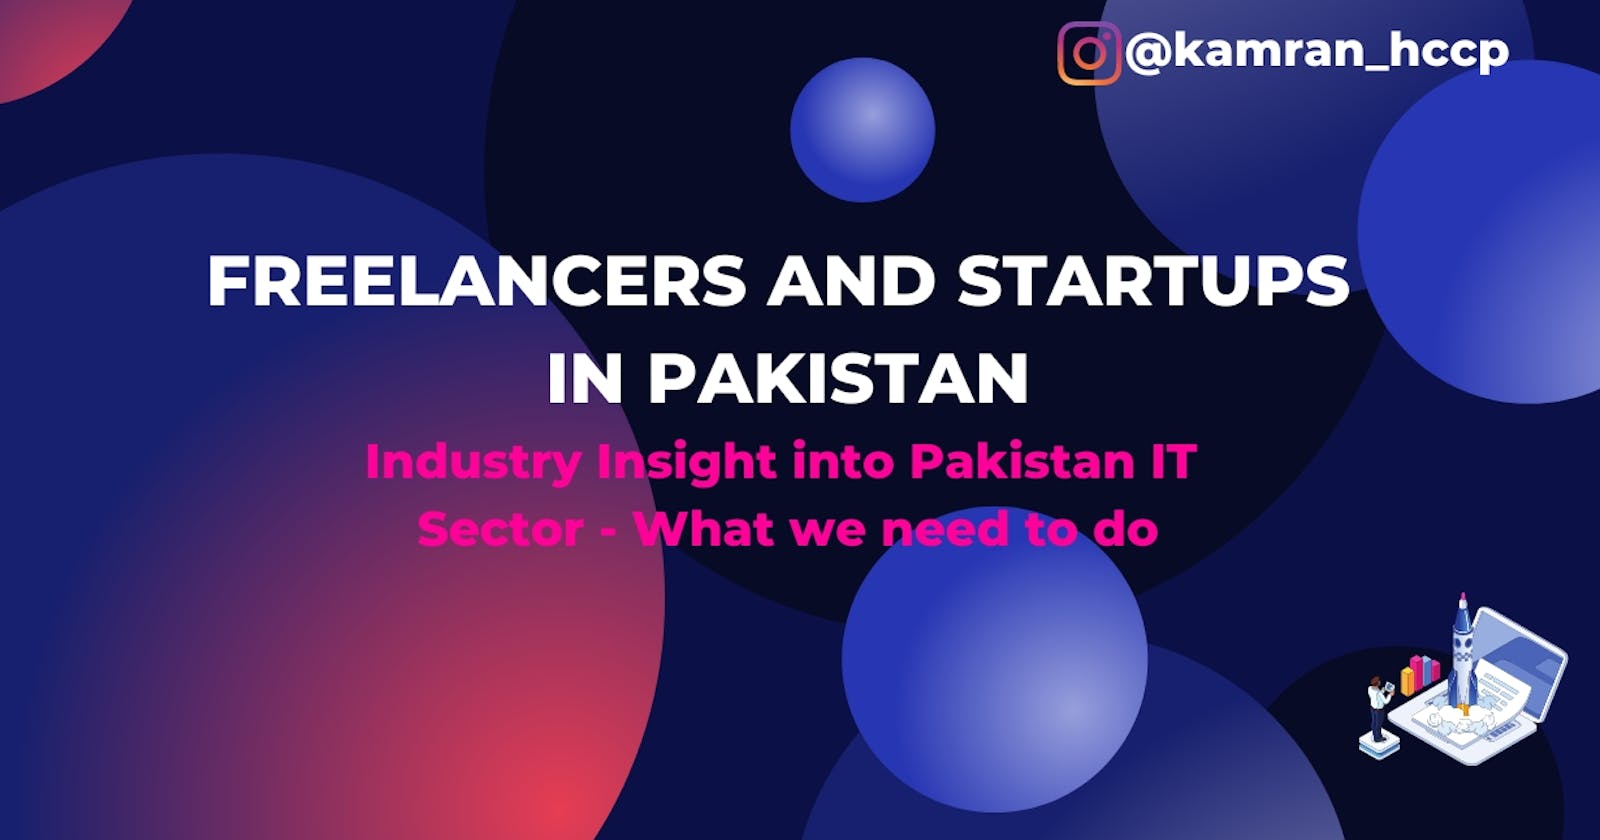 FREELANCERS and STARTUPS in Pakistan 2023 - We need to take a Step Forward